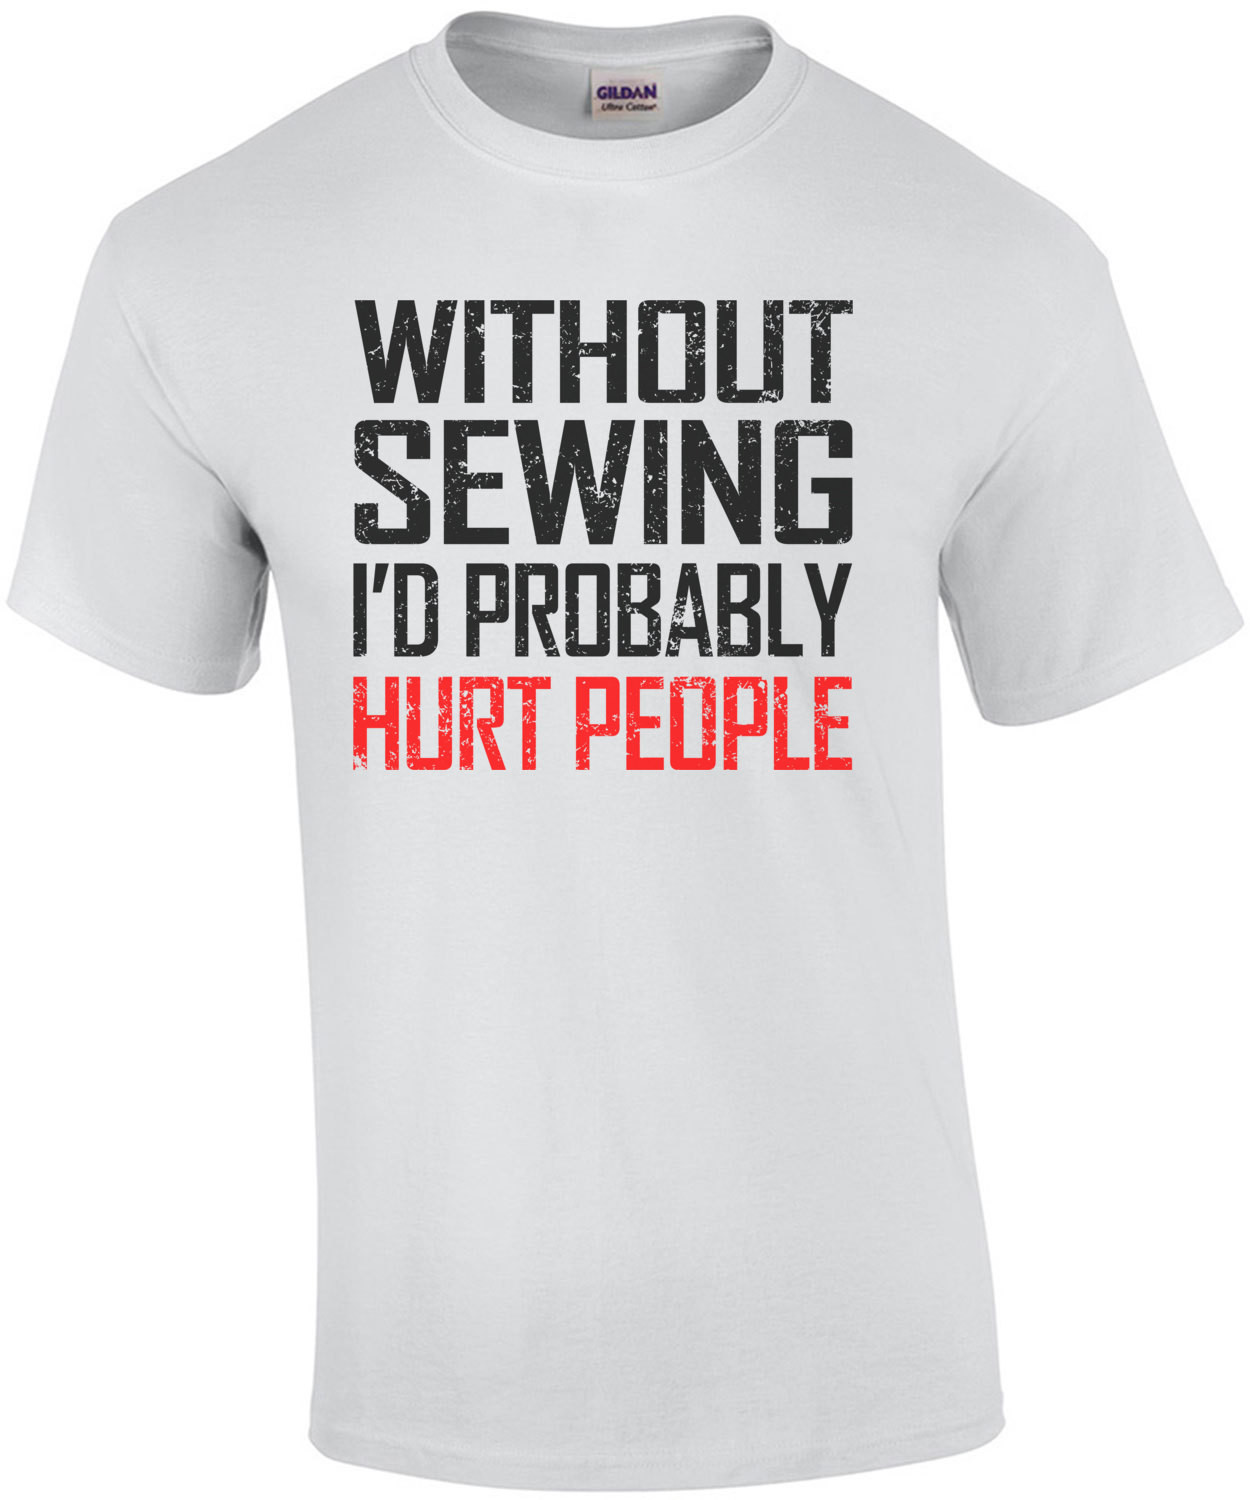 Without Sewing I'd Probably Hurt People T-Shirt